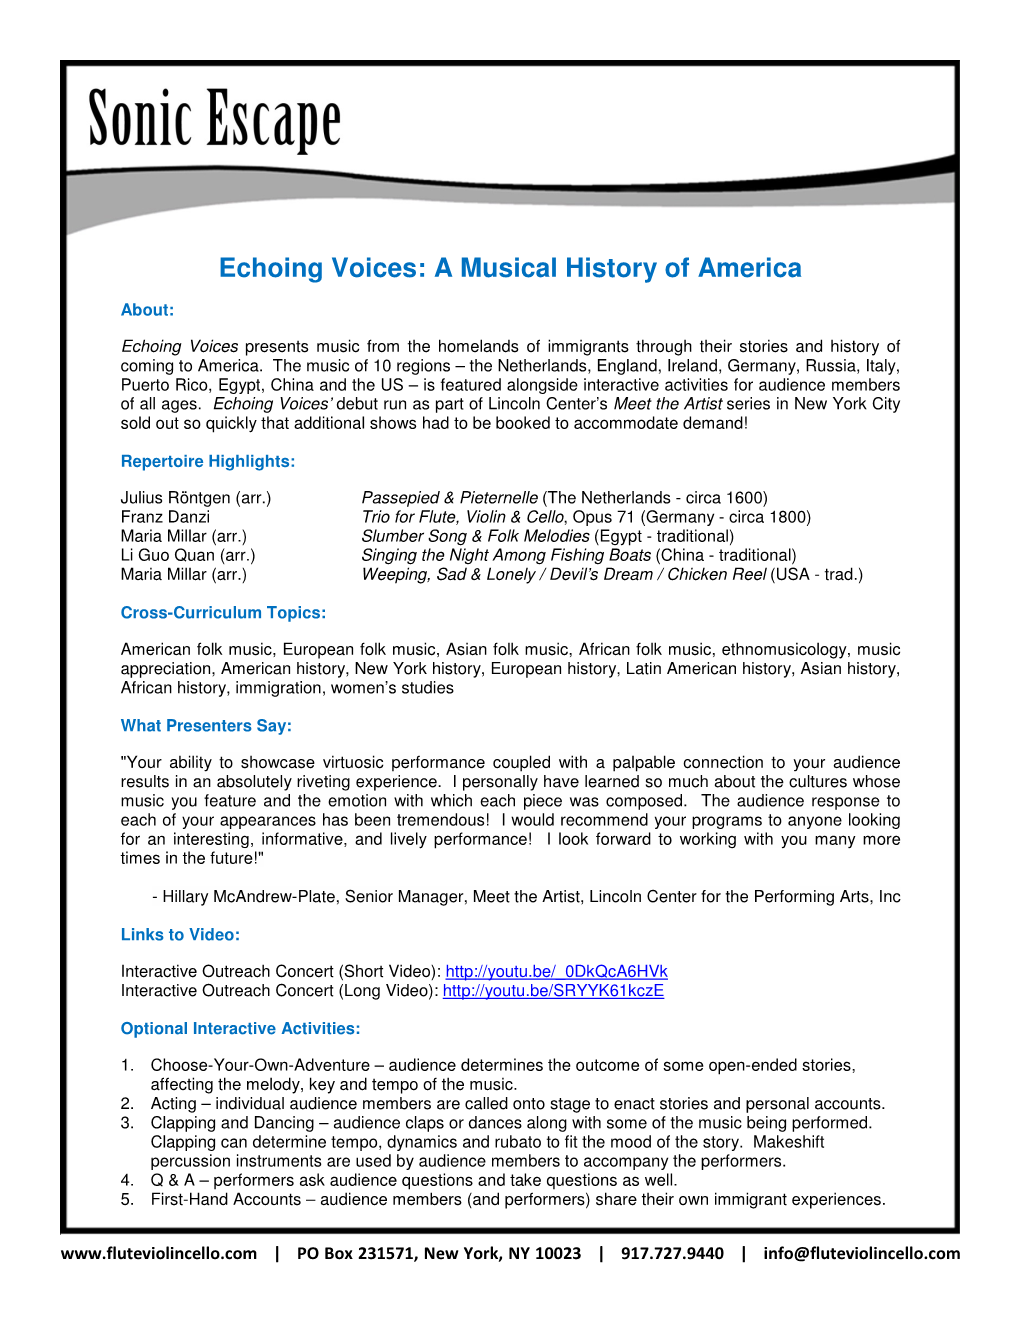 Echoing Voices: a Musical History of America